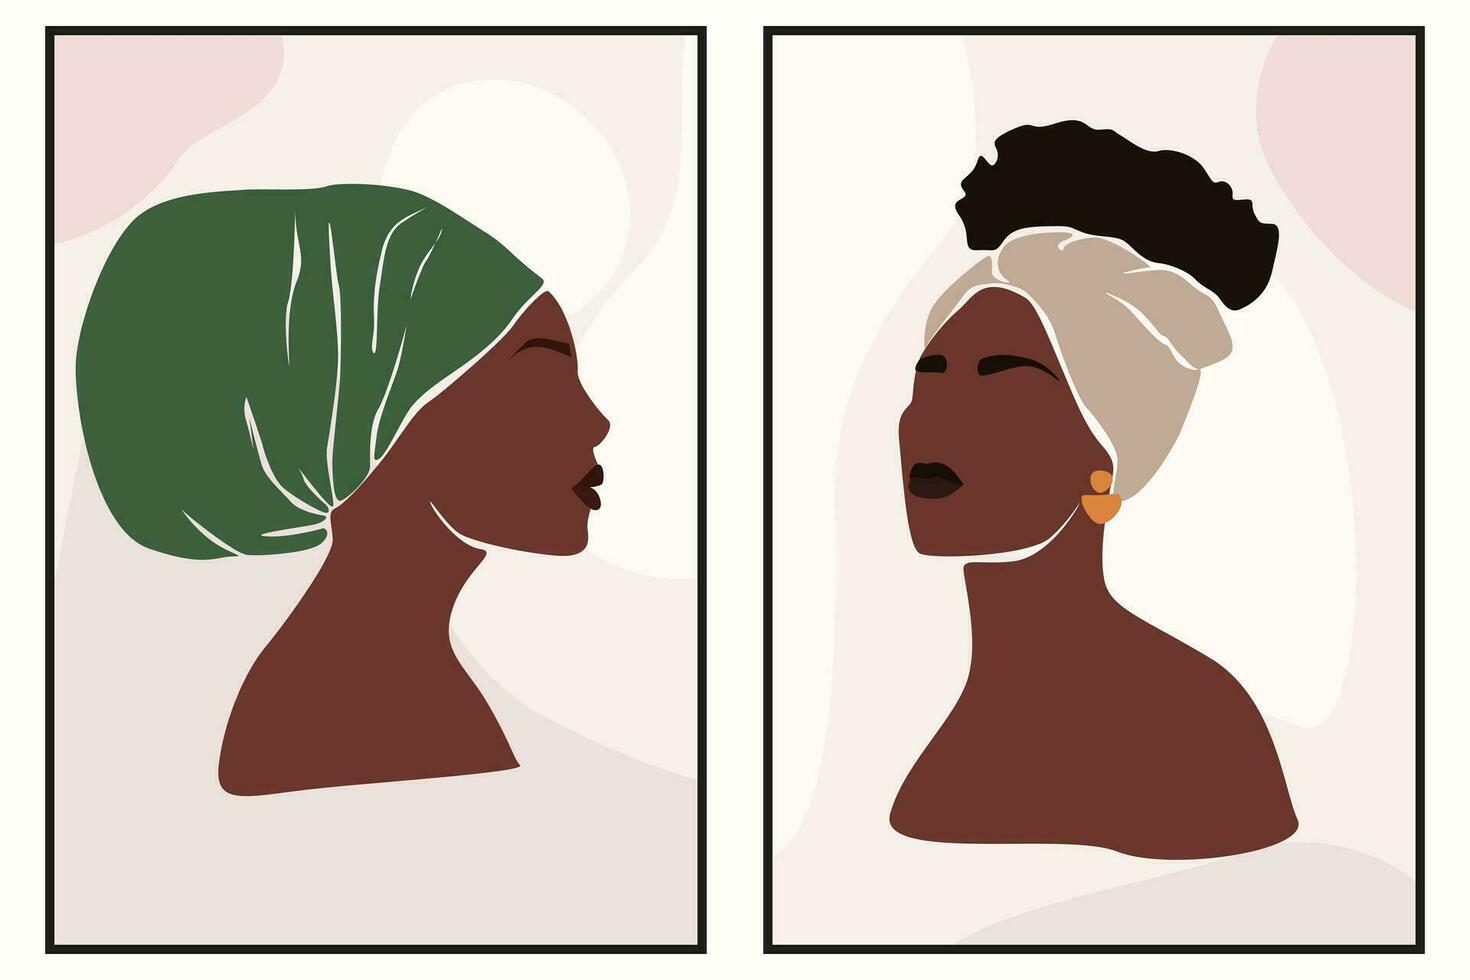 Abstract portrait illustration of african woman with tropic leaves. mid century poster. Modern Boho style background for art print, poster, card, decor. Stock vector illustration